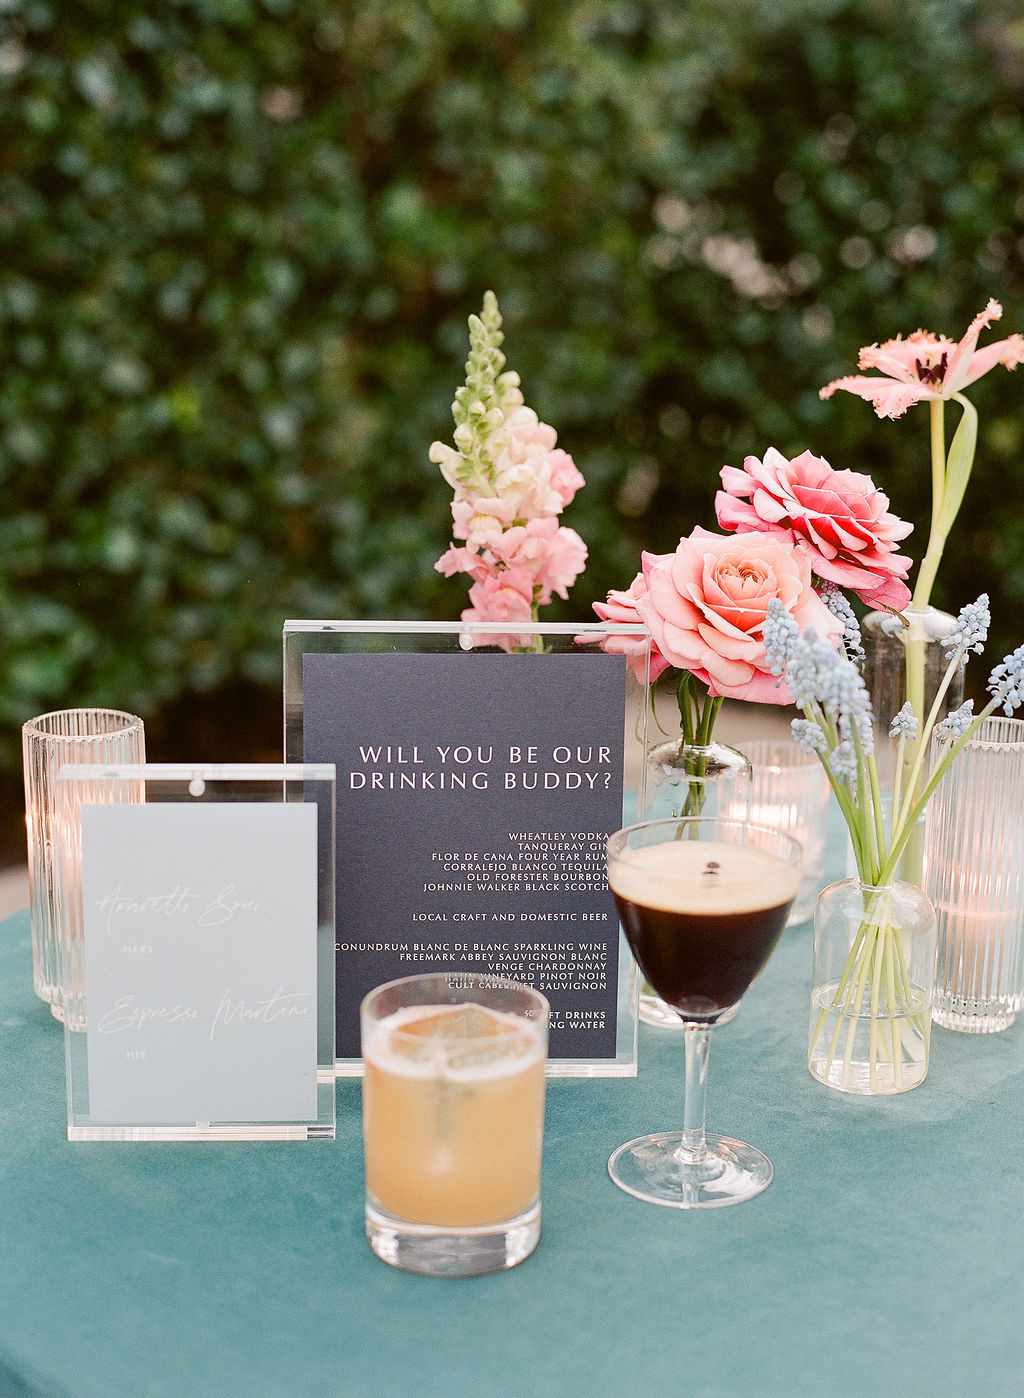 wedding cocktails on table with flowers and sign